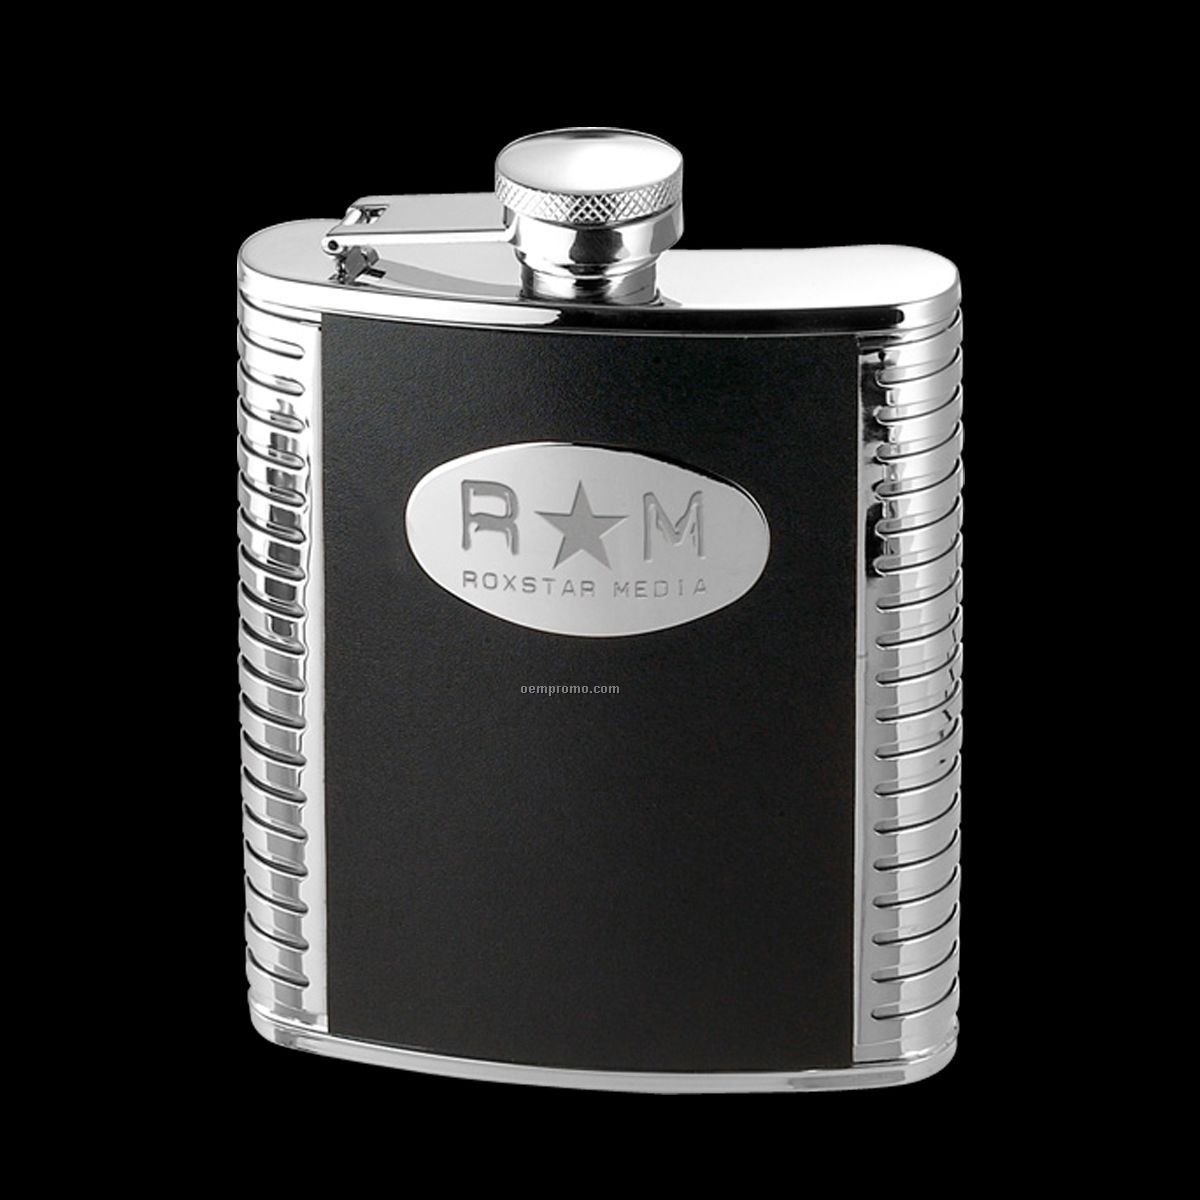 Aztec Stainless Steel/ Leather Hip Flask